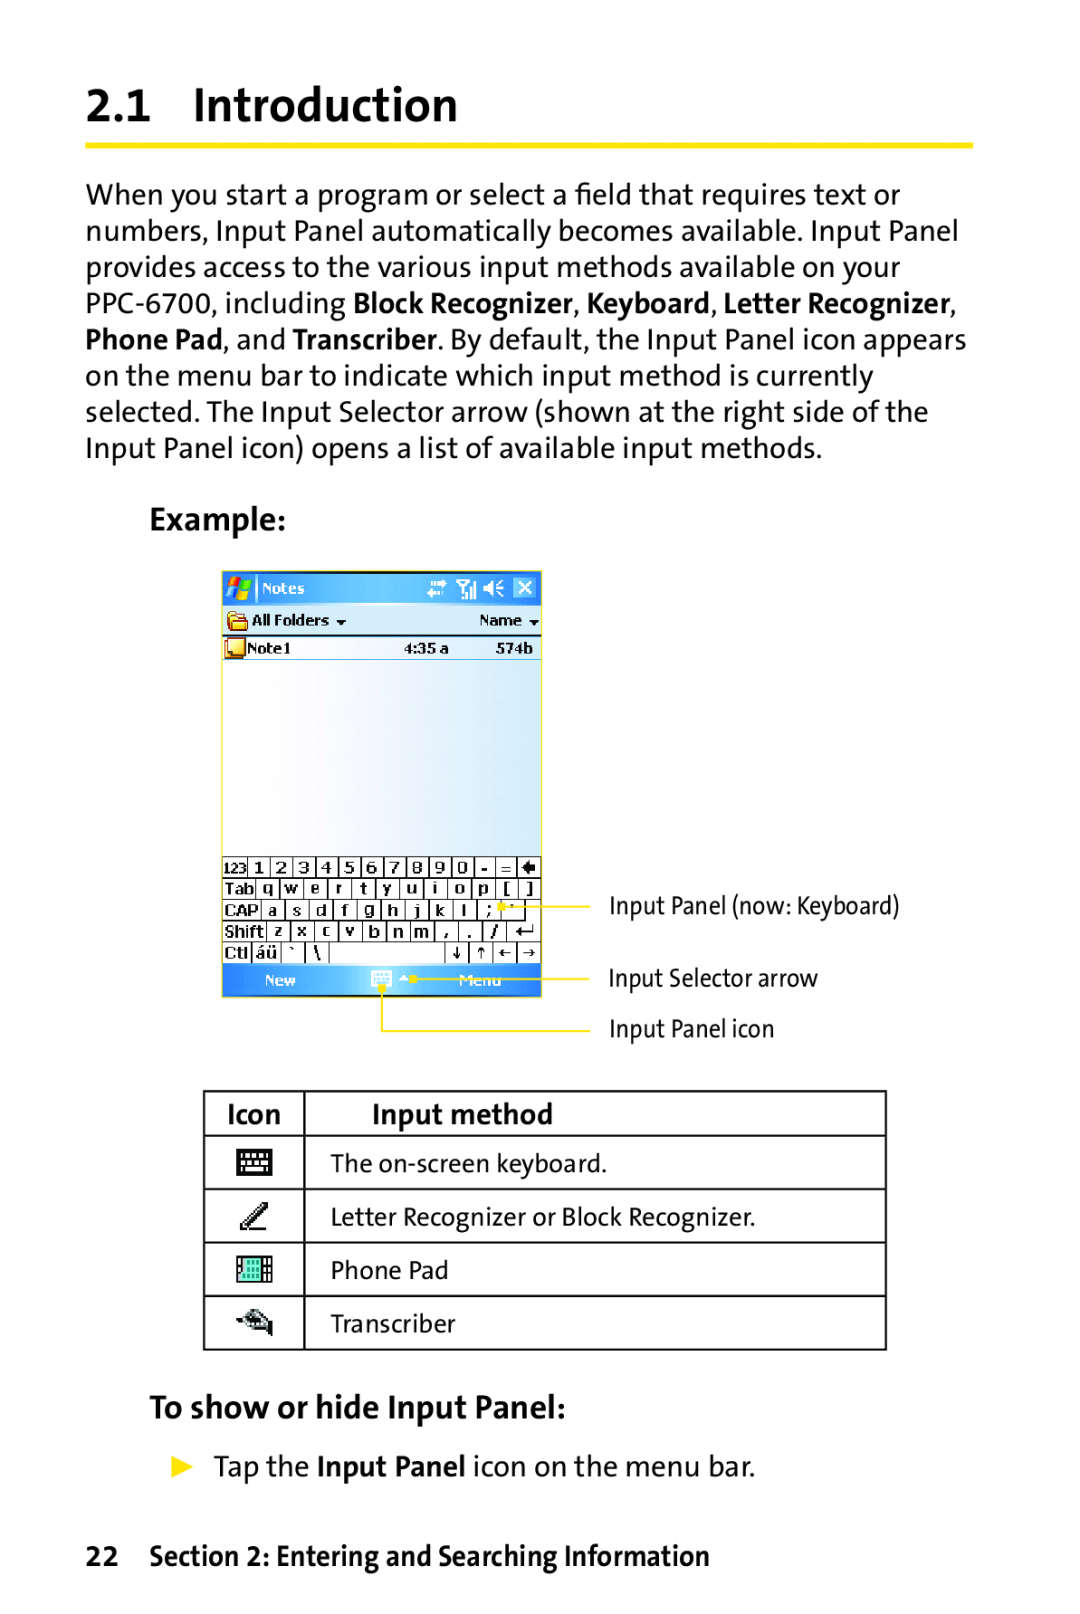 Sprint Nextel PPC-6700 manual Introduction, Example, To show or hide Input Panel, Icon, Input method 